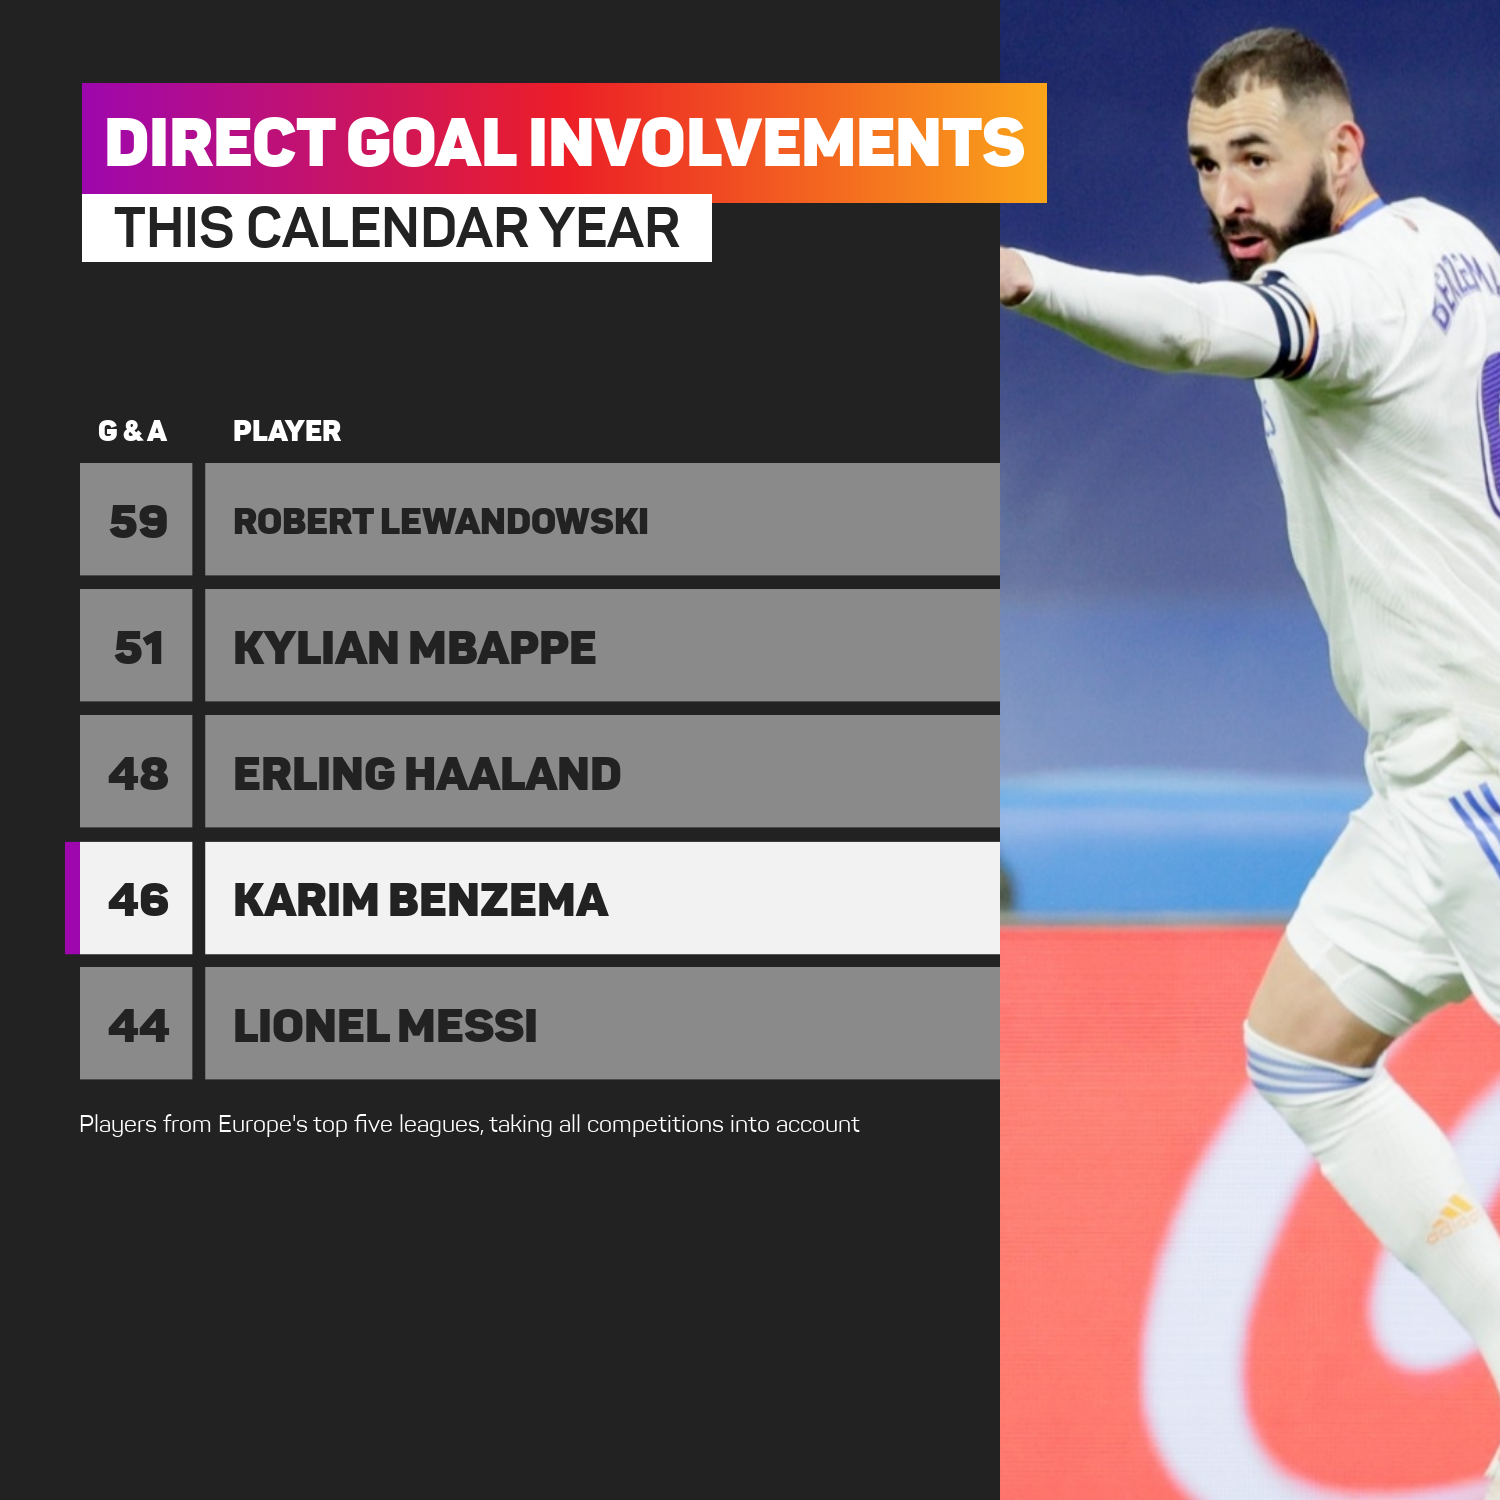 Karim Benzema has been directly involved in 46 Real Madrid goals this year